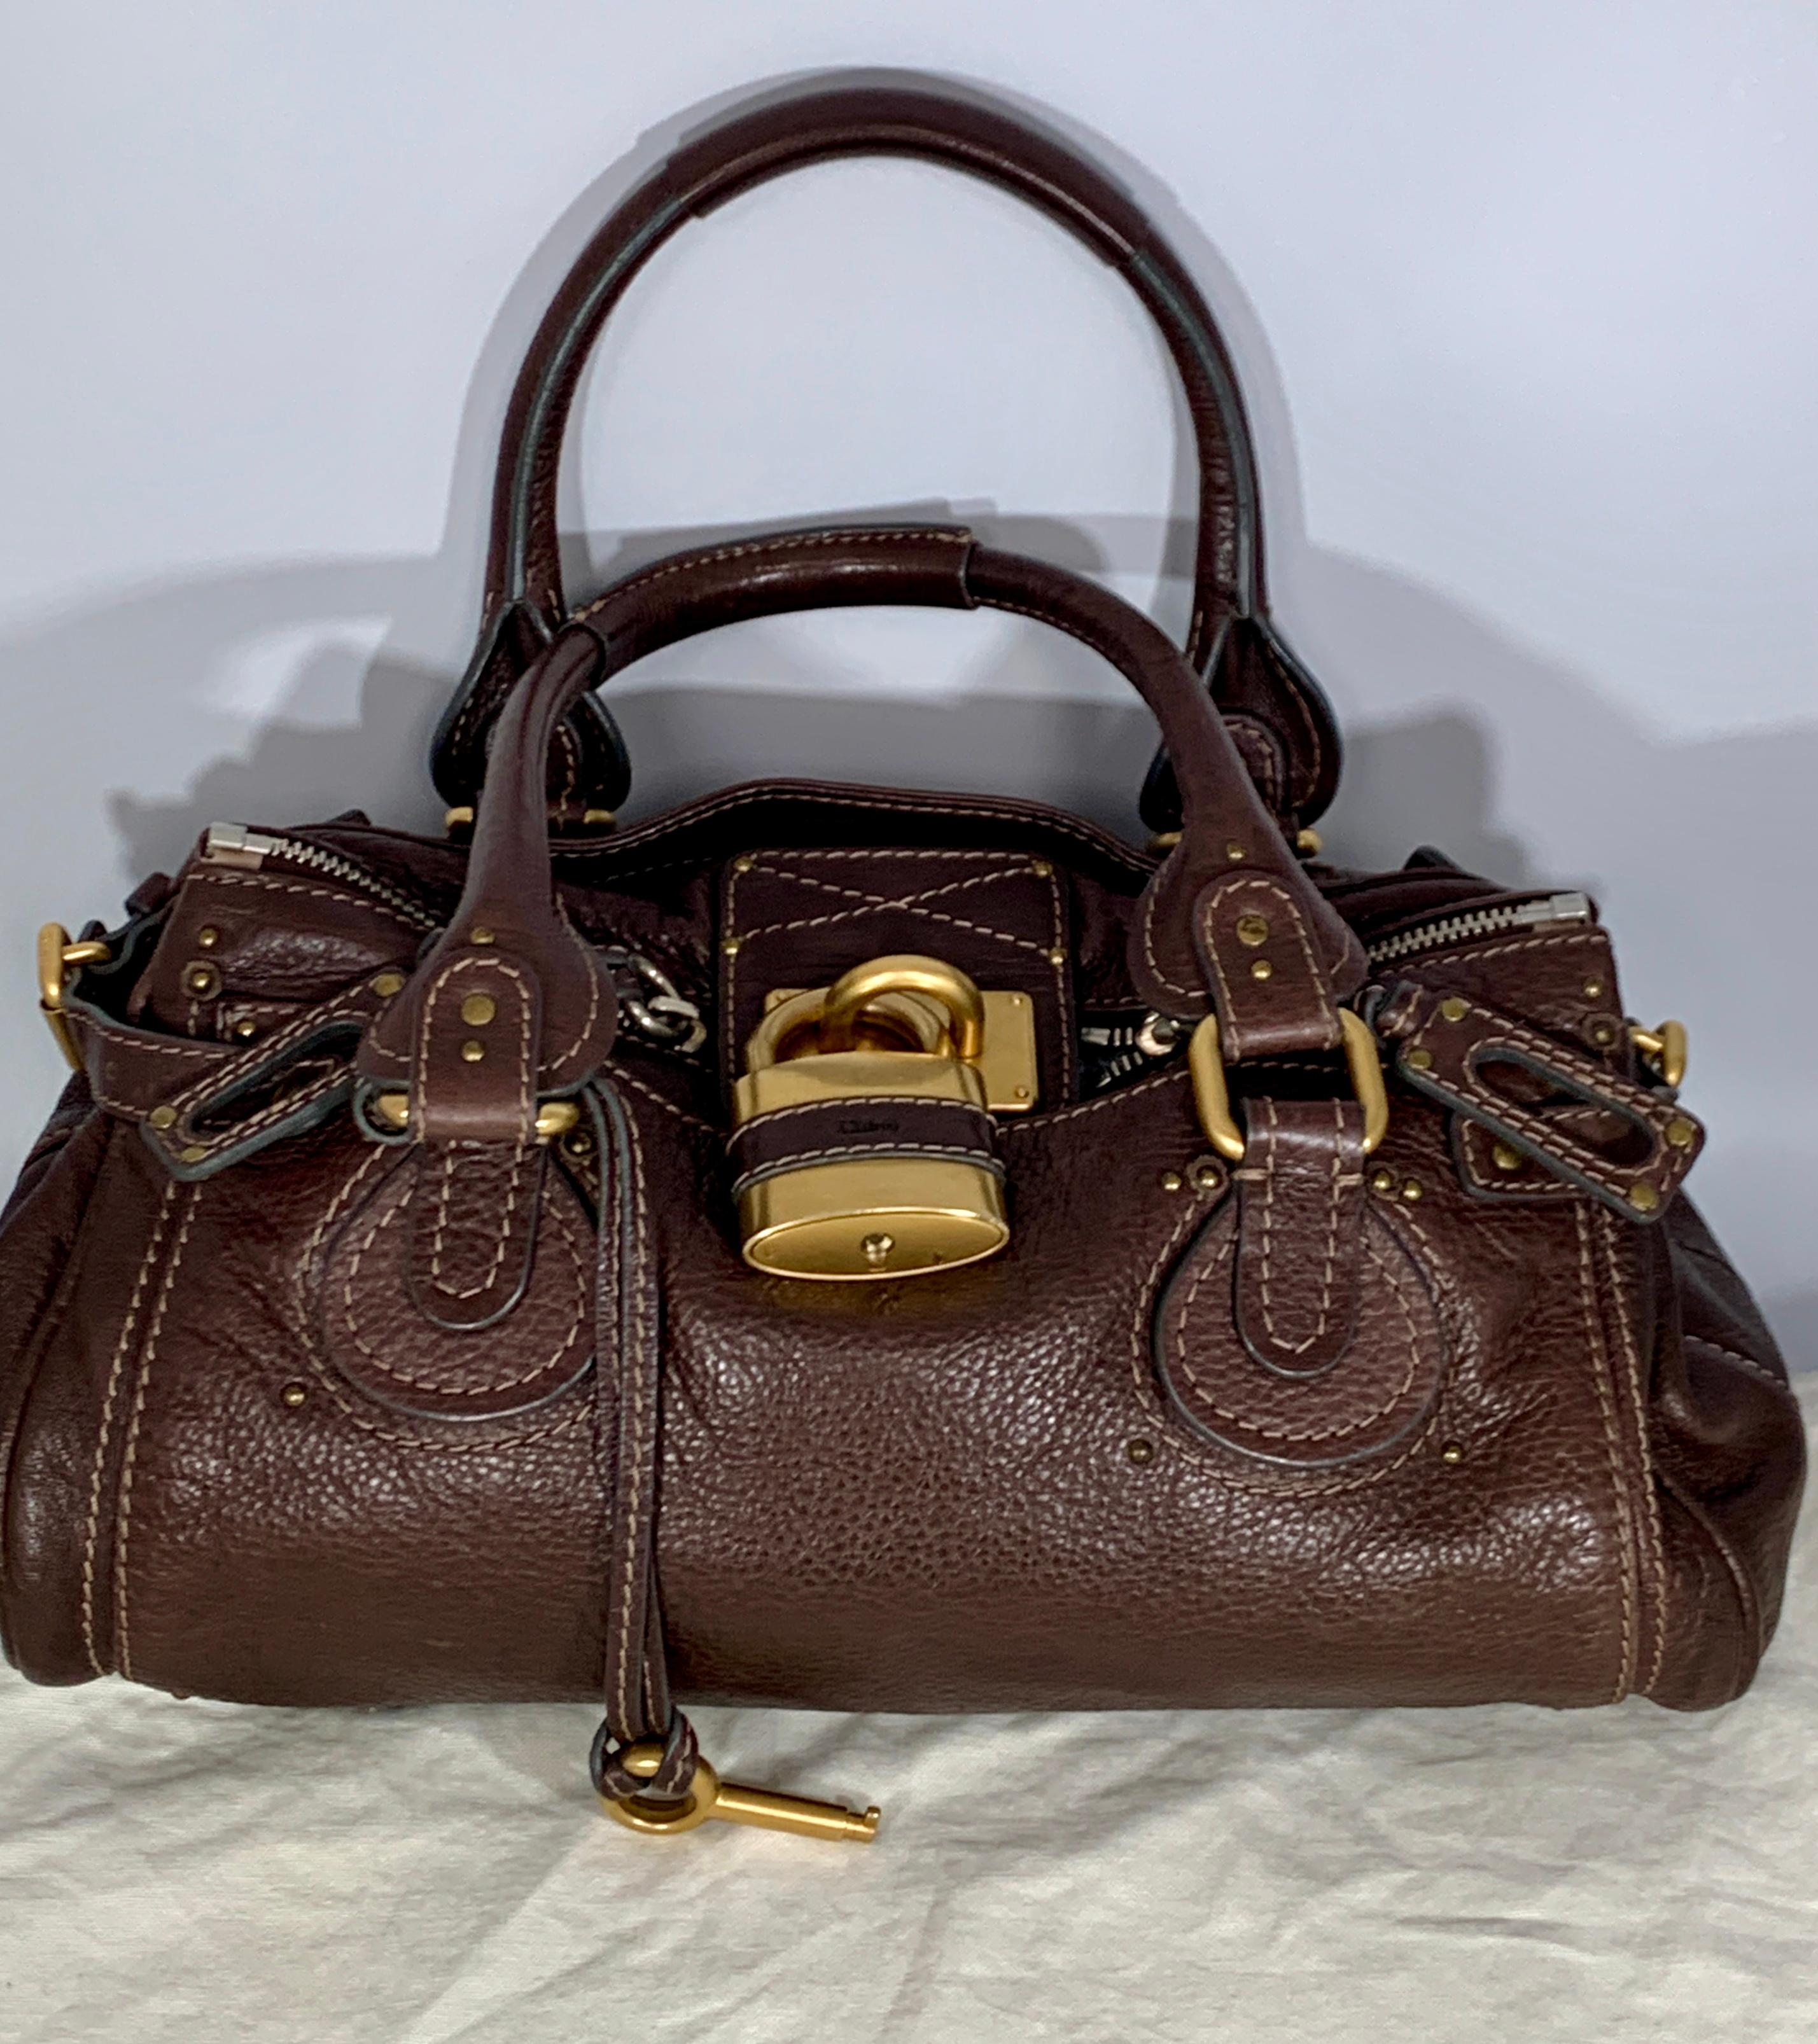 Get the bag that is coveted by celebrities everywhere! This gorgeous Chloe Paddington Medium Satchel Bag in this rich dark brown color. It has a slouchy rectangular shape that is ultra-spacious and features incredible details such as a giant Chloe